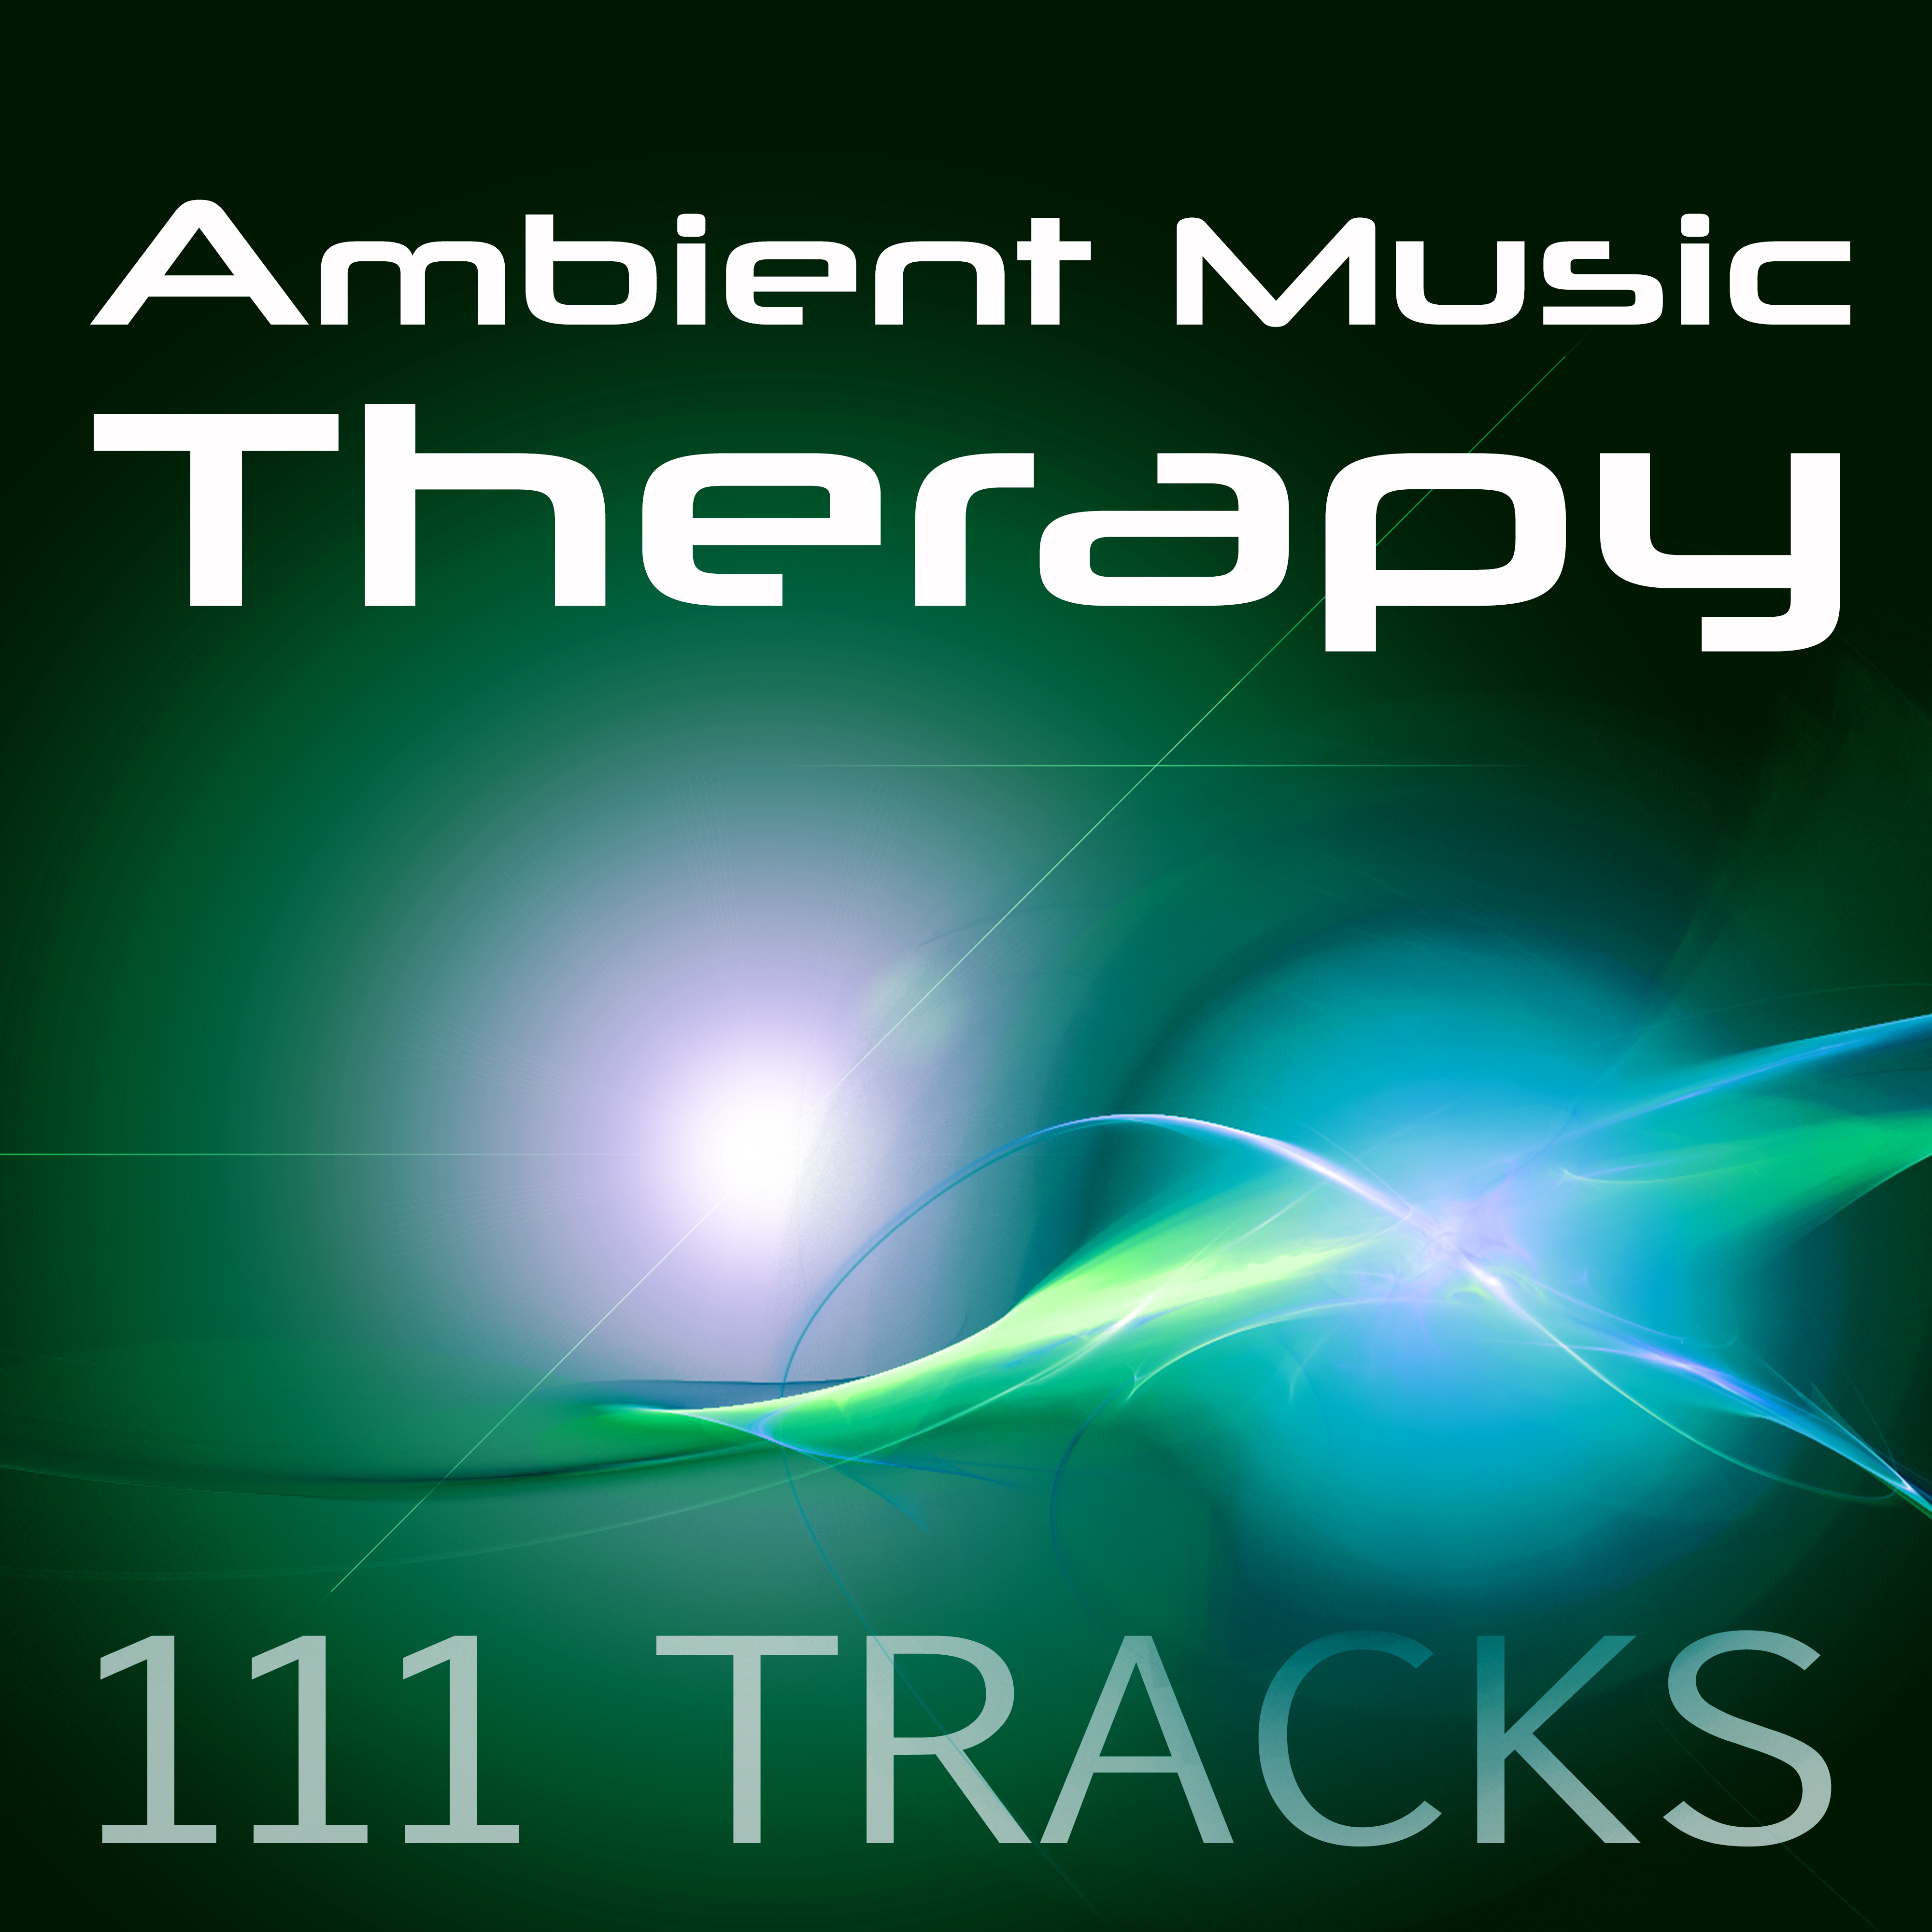 Ambient Music Therapy: 111 Tracks  White Noise for Deep Sleep, Relaxation Meditation, Asian Zen Spa, Shiatsu Massage, Chill  Relax, New Age Music, Ambient Sounds for Wellness and Yoga